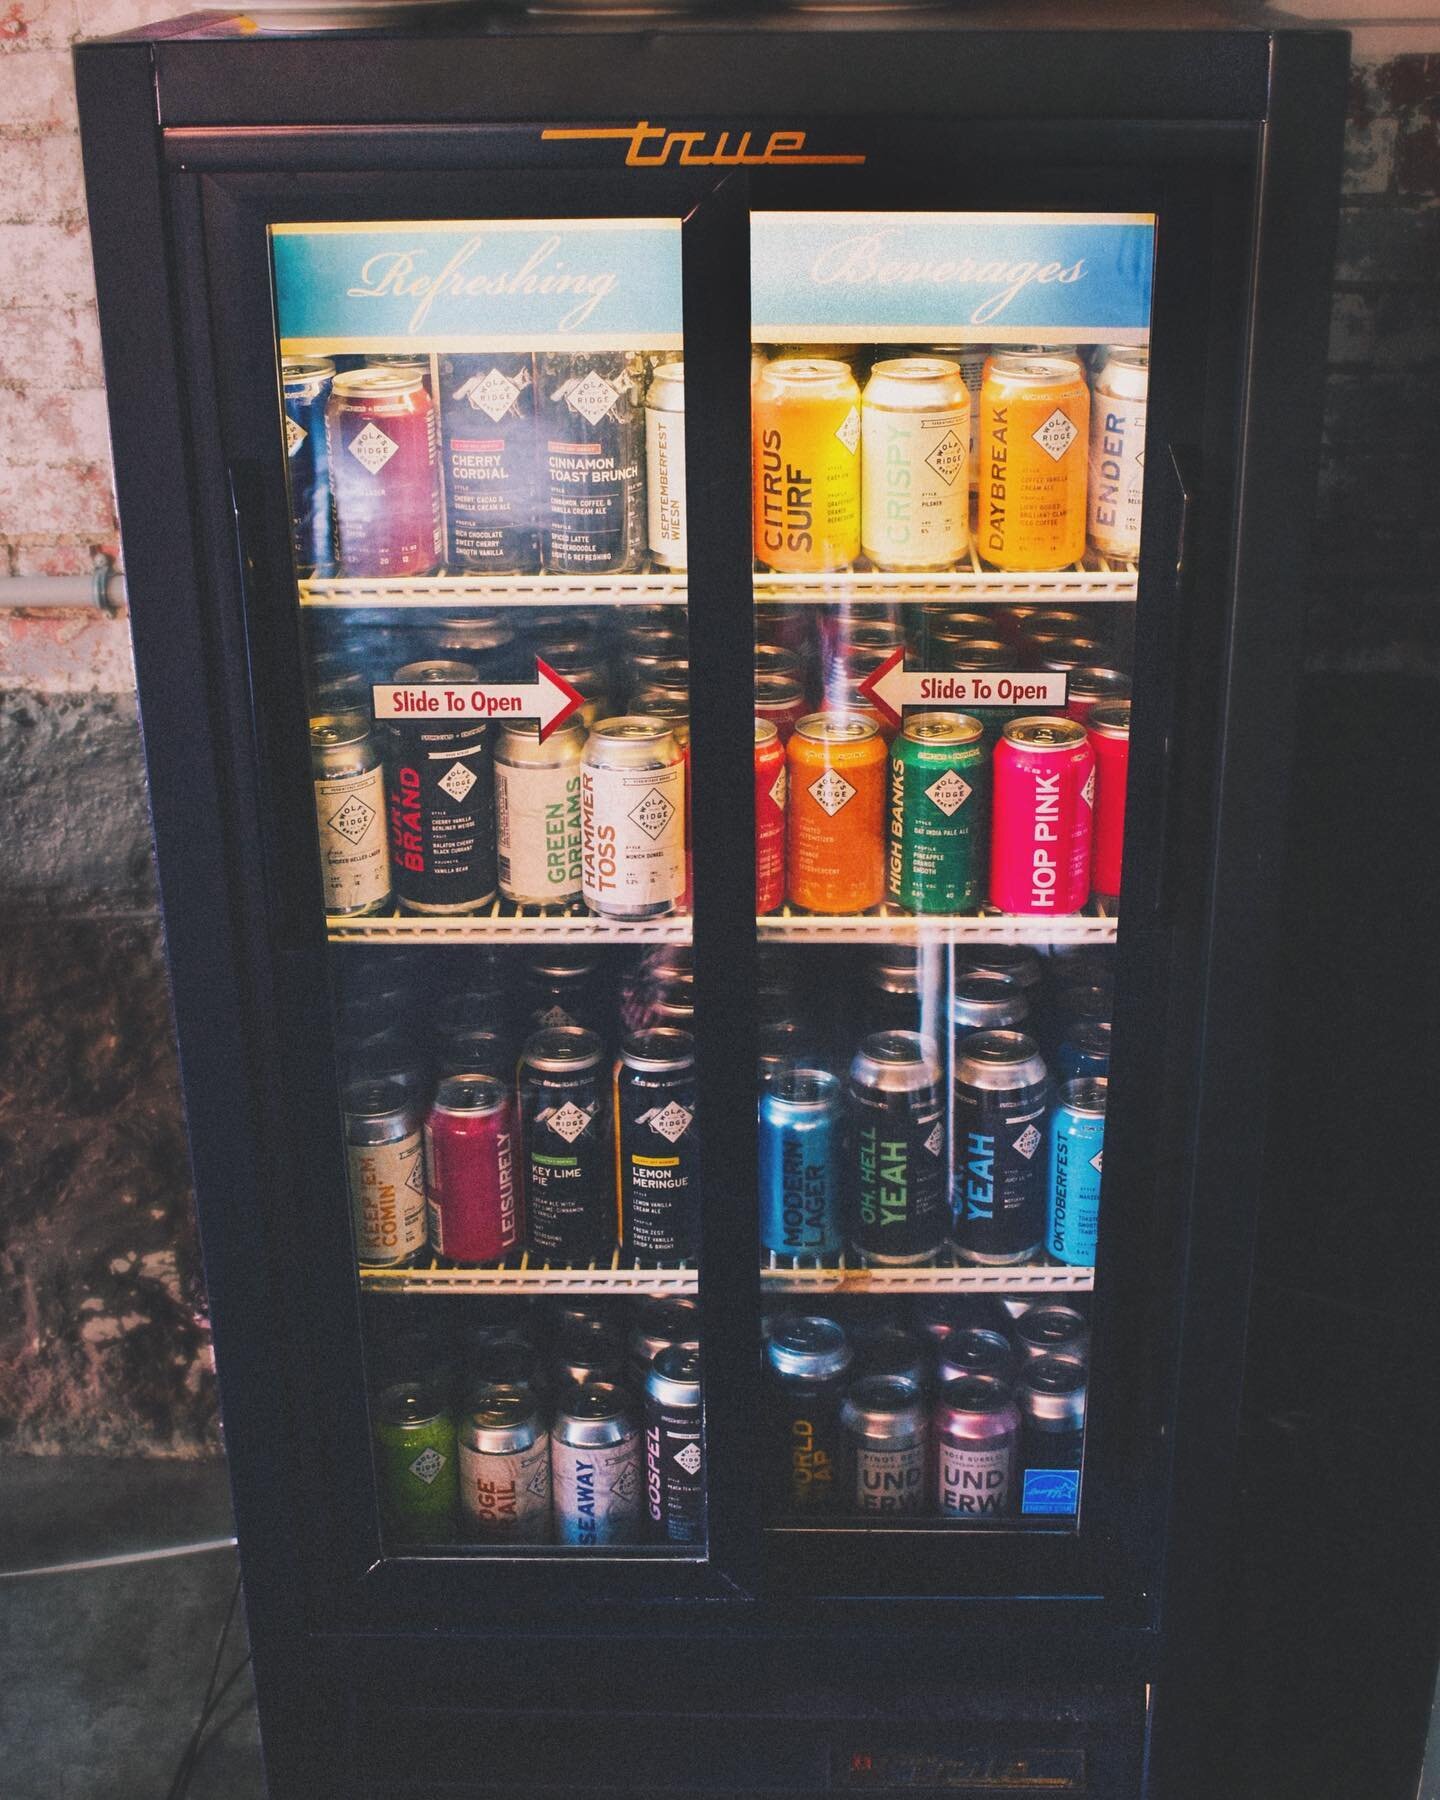 Raise your hand if you want your fridge to look like this 🤚
The sun is shining and the weekend is here: time to sock up! You can stroll right up to our curbside pick up table and get single cans of any beer we&rsquo;re selling. Mix and match, create